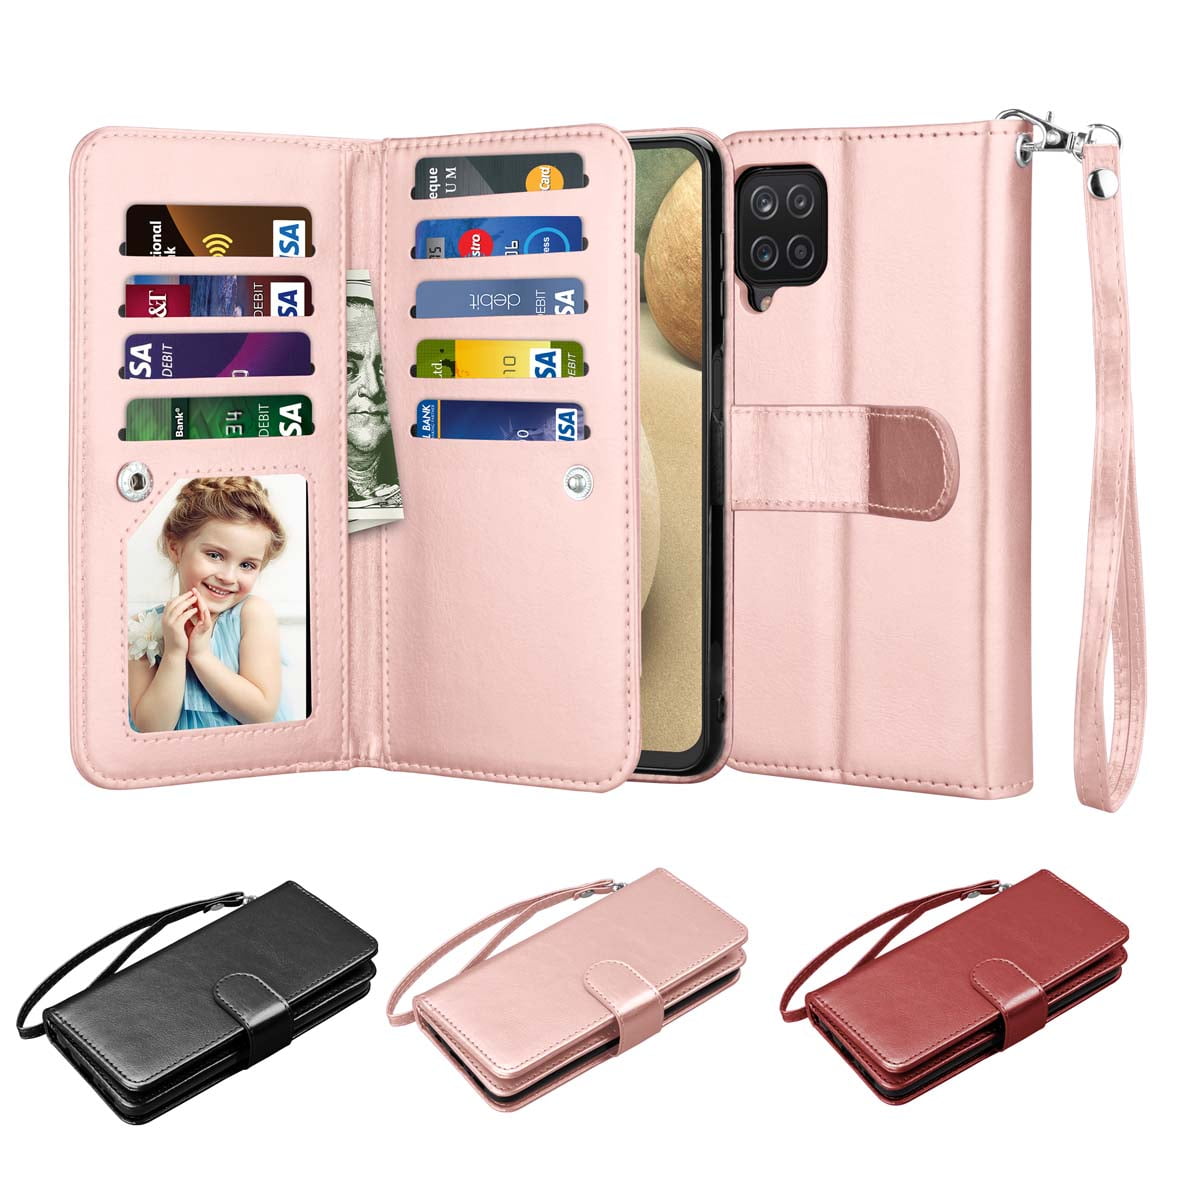 Samsung Galaxy S10 Flip Case Cover for Leather Card Holders Extra-Durable Business Kickstand Cell Phone Cover Flip Cover 